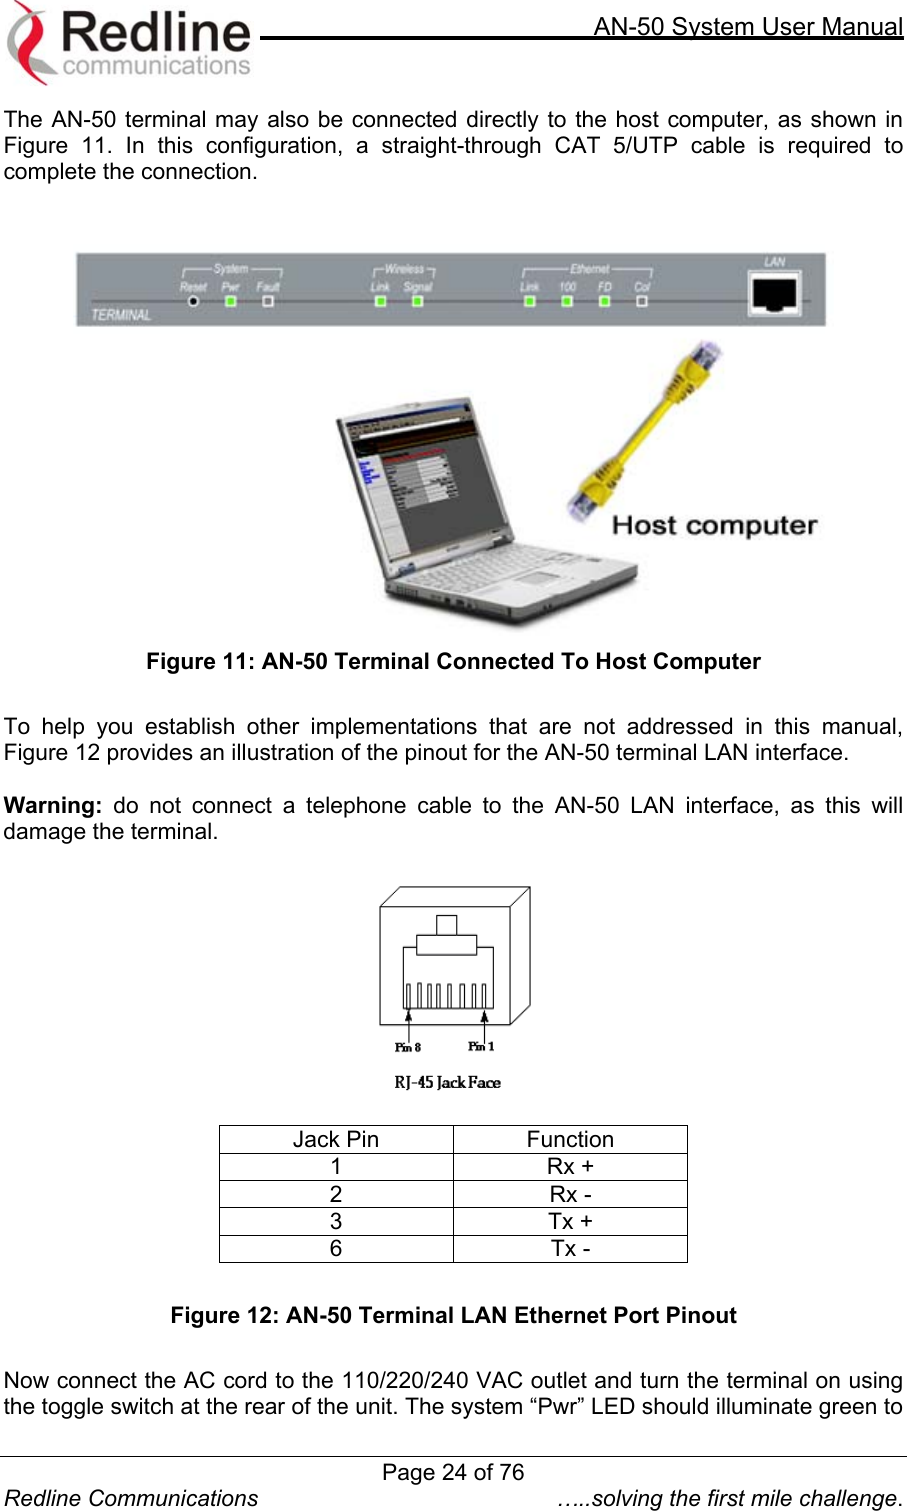     AN-50 System User Manual  Redline Communications  …..solving the first mile challenge. The AN-50 terminal may also be connected directly to the host computer, as shown in Figure 11. In this configuration, a straight-through CAT 5/UTP cable is required to complete the connection.      Figure 11: AN-50 Terminal Connected To Host Computer  To help you establish other implementations that are not addressed in this manual, Figure 12 provides an illustration of the pinout for the AN-50 terminal LAN interface.    Warning: do not connect a telephone cable to the AN-50 LAN interface, as this will damage the terminal.    Jack Pin  Function 1 Rx + 2 Rx - 3 Tx + 6 Tx -  Figure 12: AN-50 Terminal LAN Ethernet Port Pinout  Now connect the AC cord to the 110/220/240 VAC outlet and turn the terminal on using the toggle switch at the rear of the unit. The system “Pwr” LED should illuminate green to Page 24 of 76